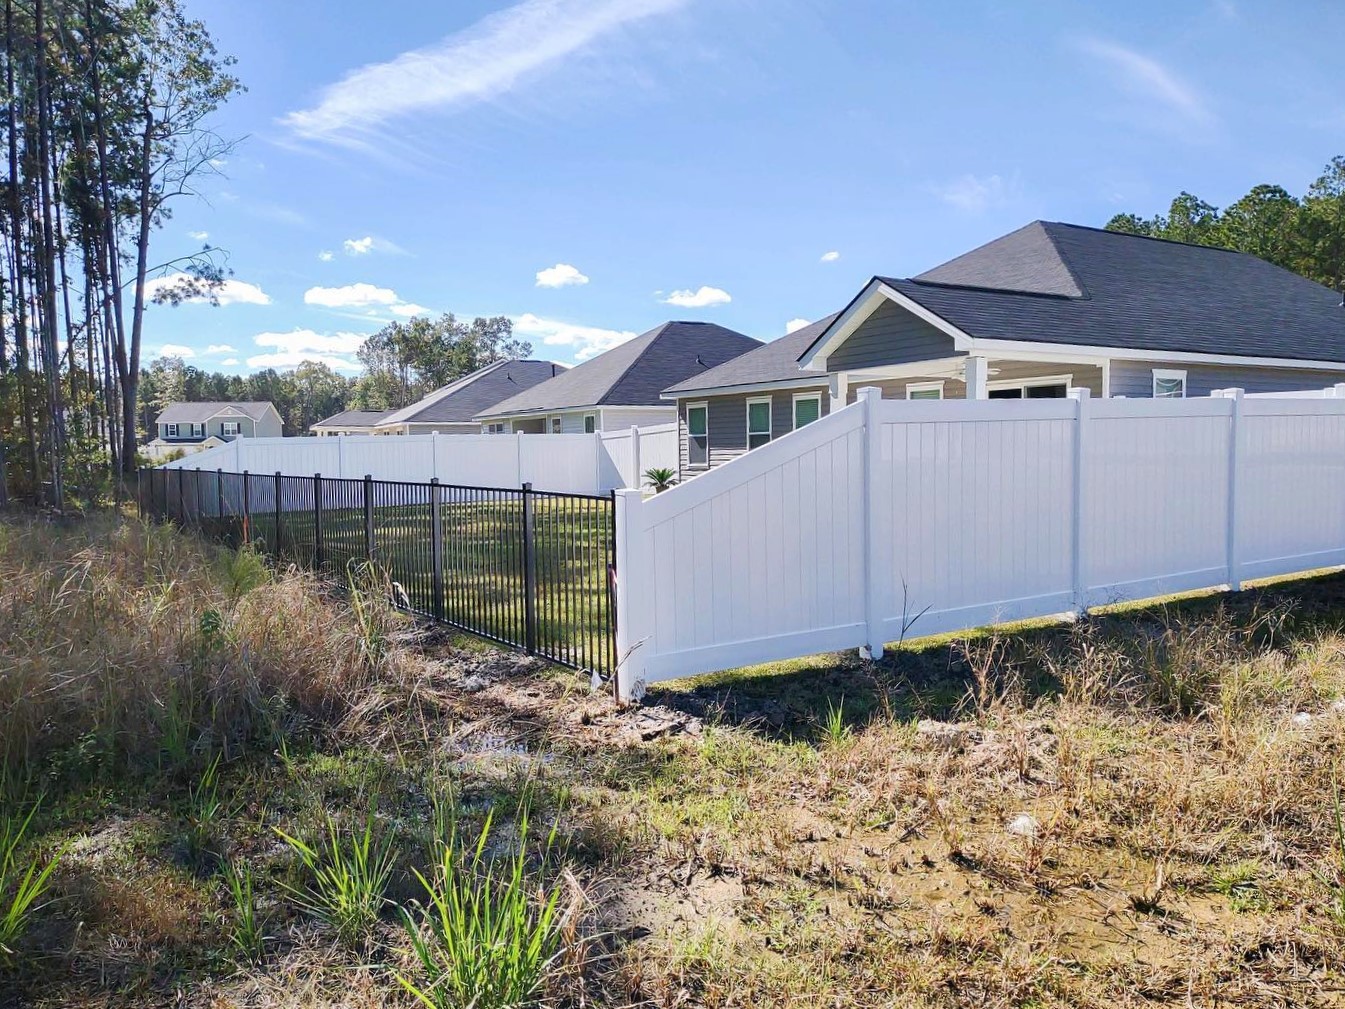 Photo of a white vinyl fence and a black aluminum fence together